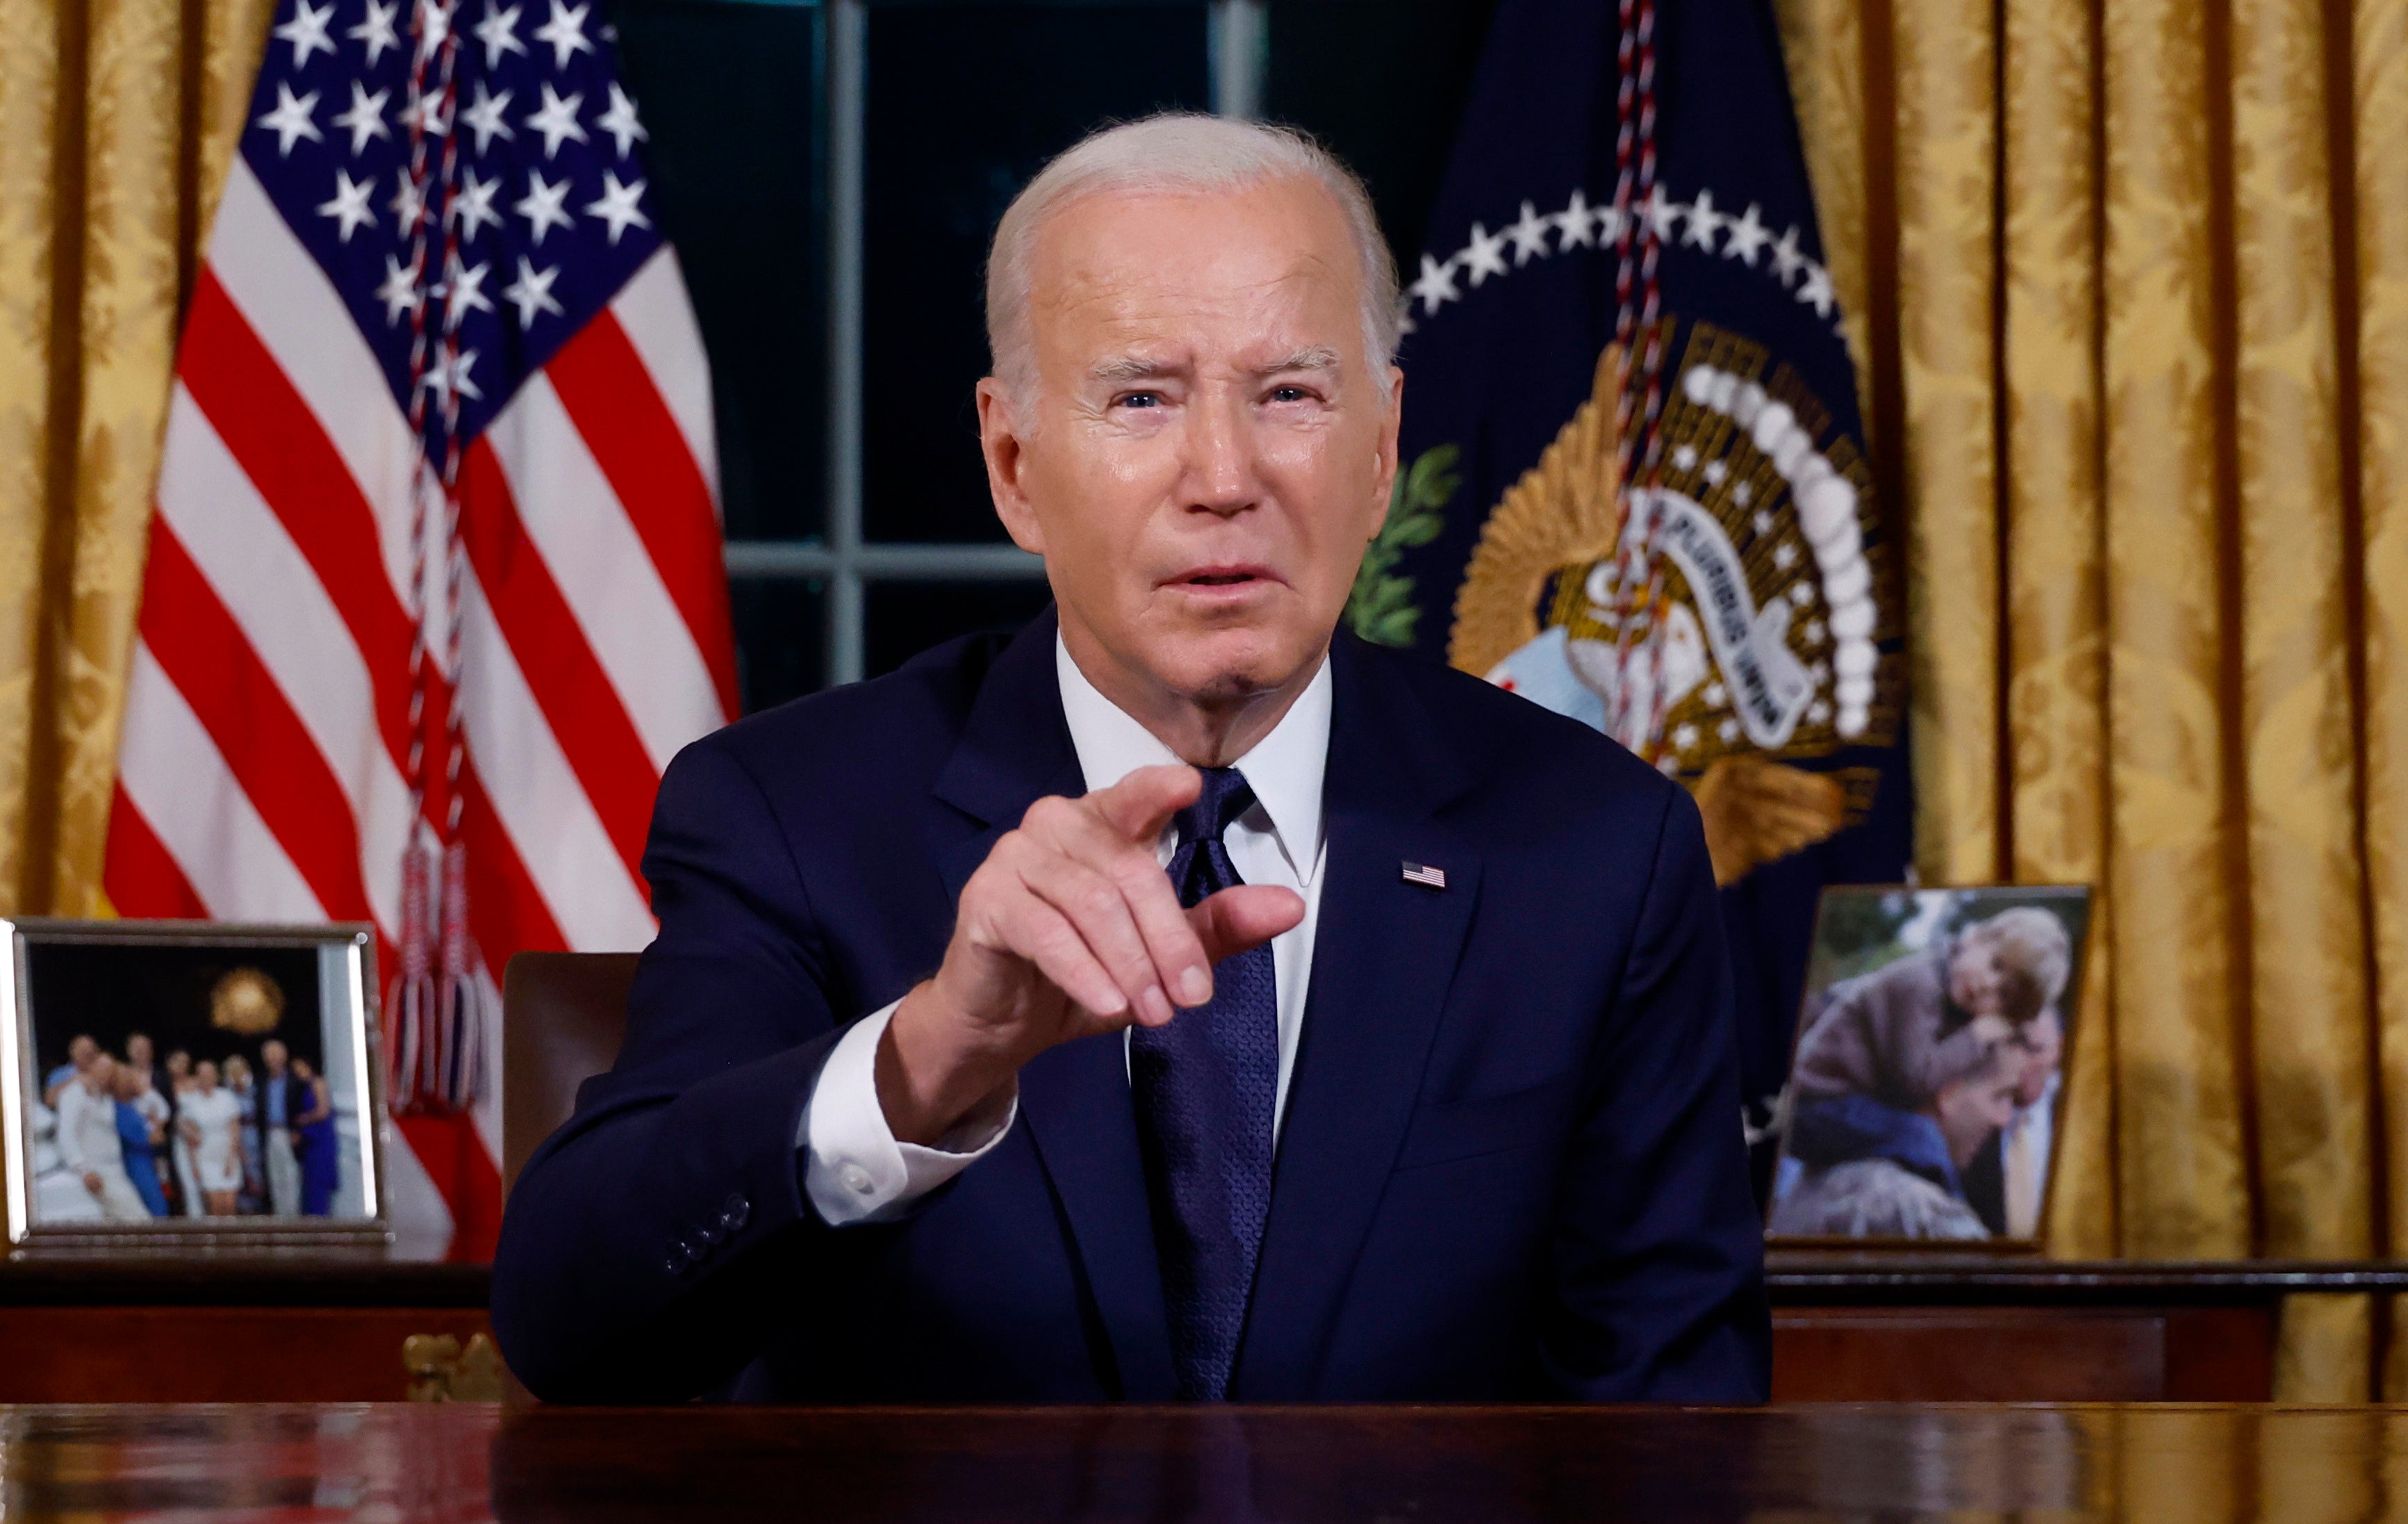 President Biden said freeing US hostages was a top priority